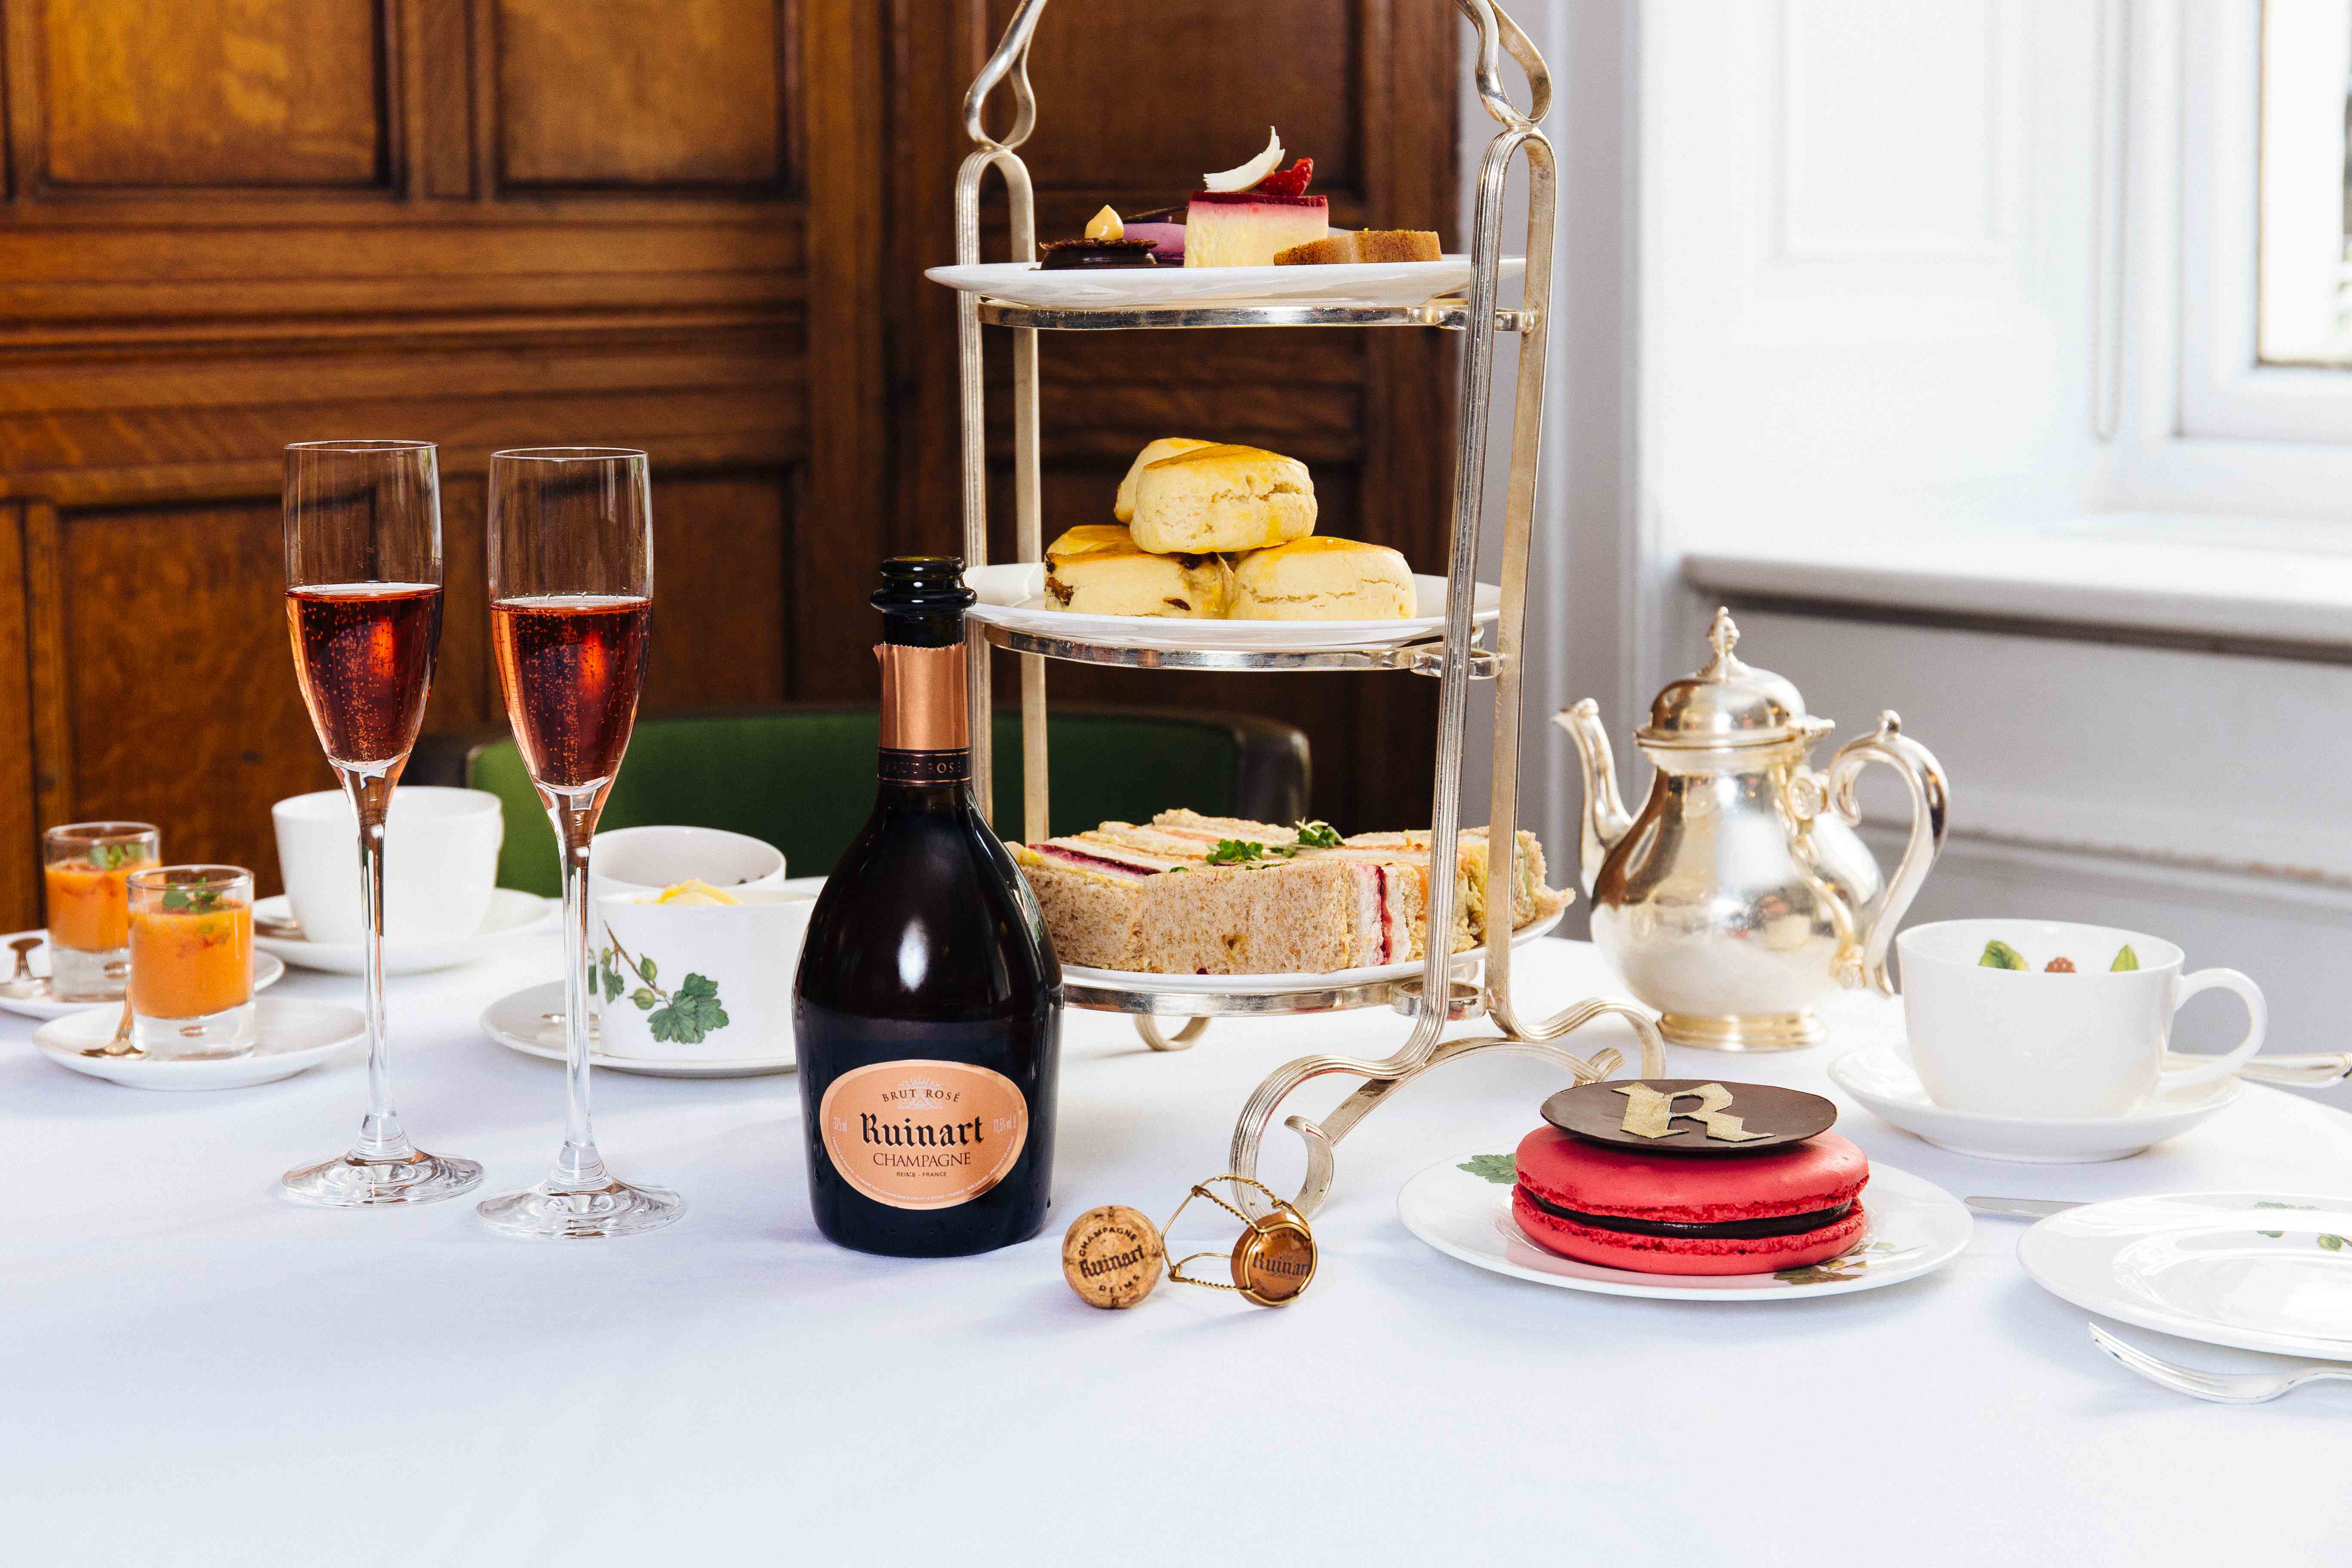 Enjoy afternoon tea with Ruinart champagne at Browns Hotel